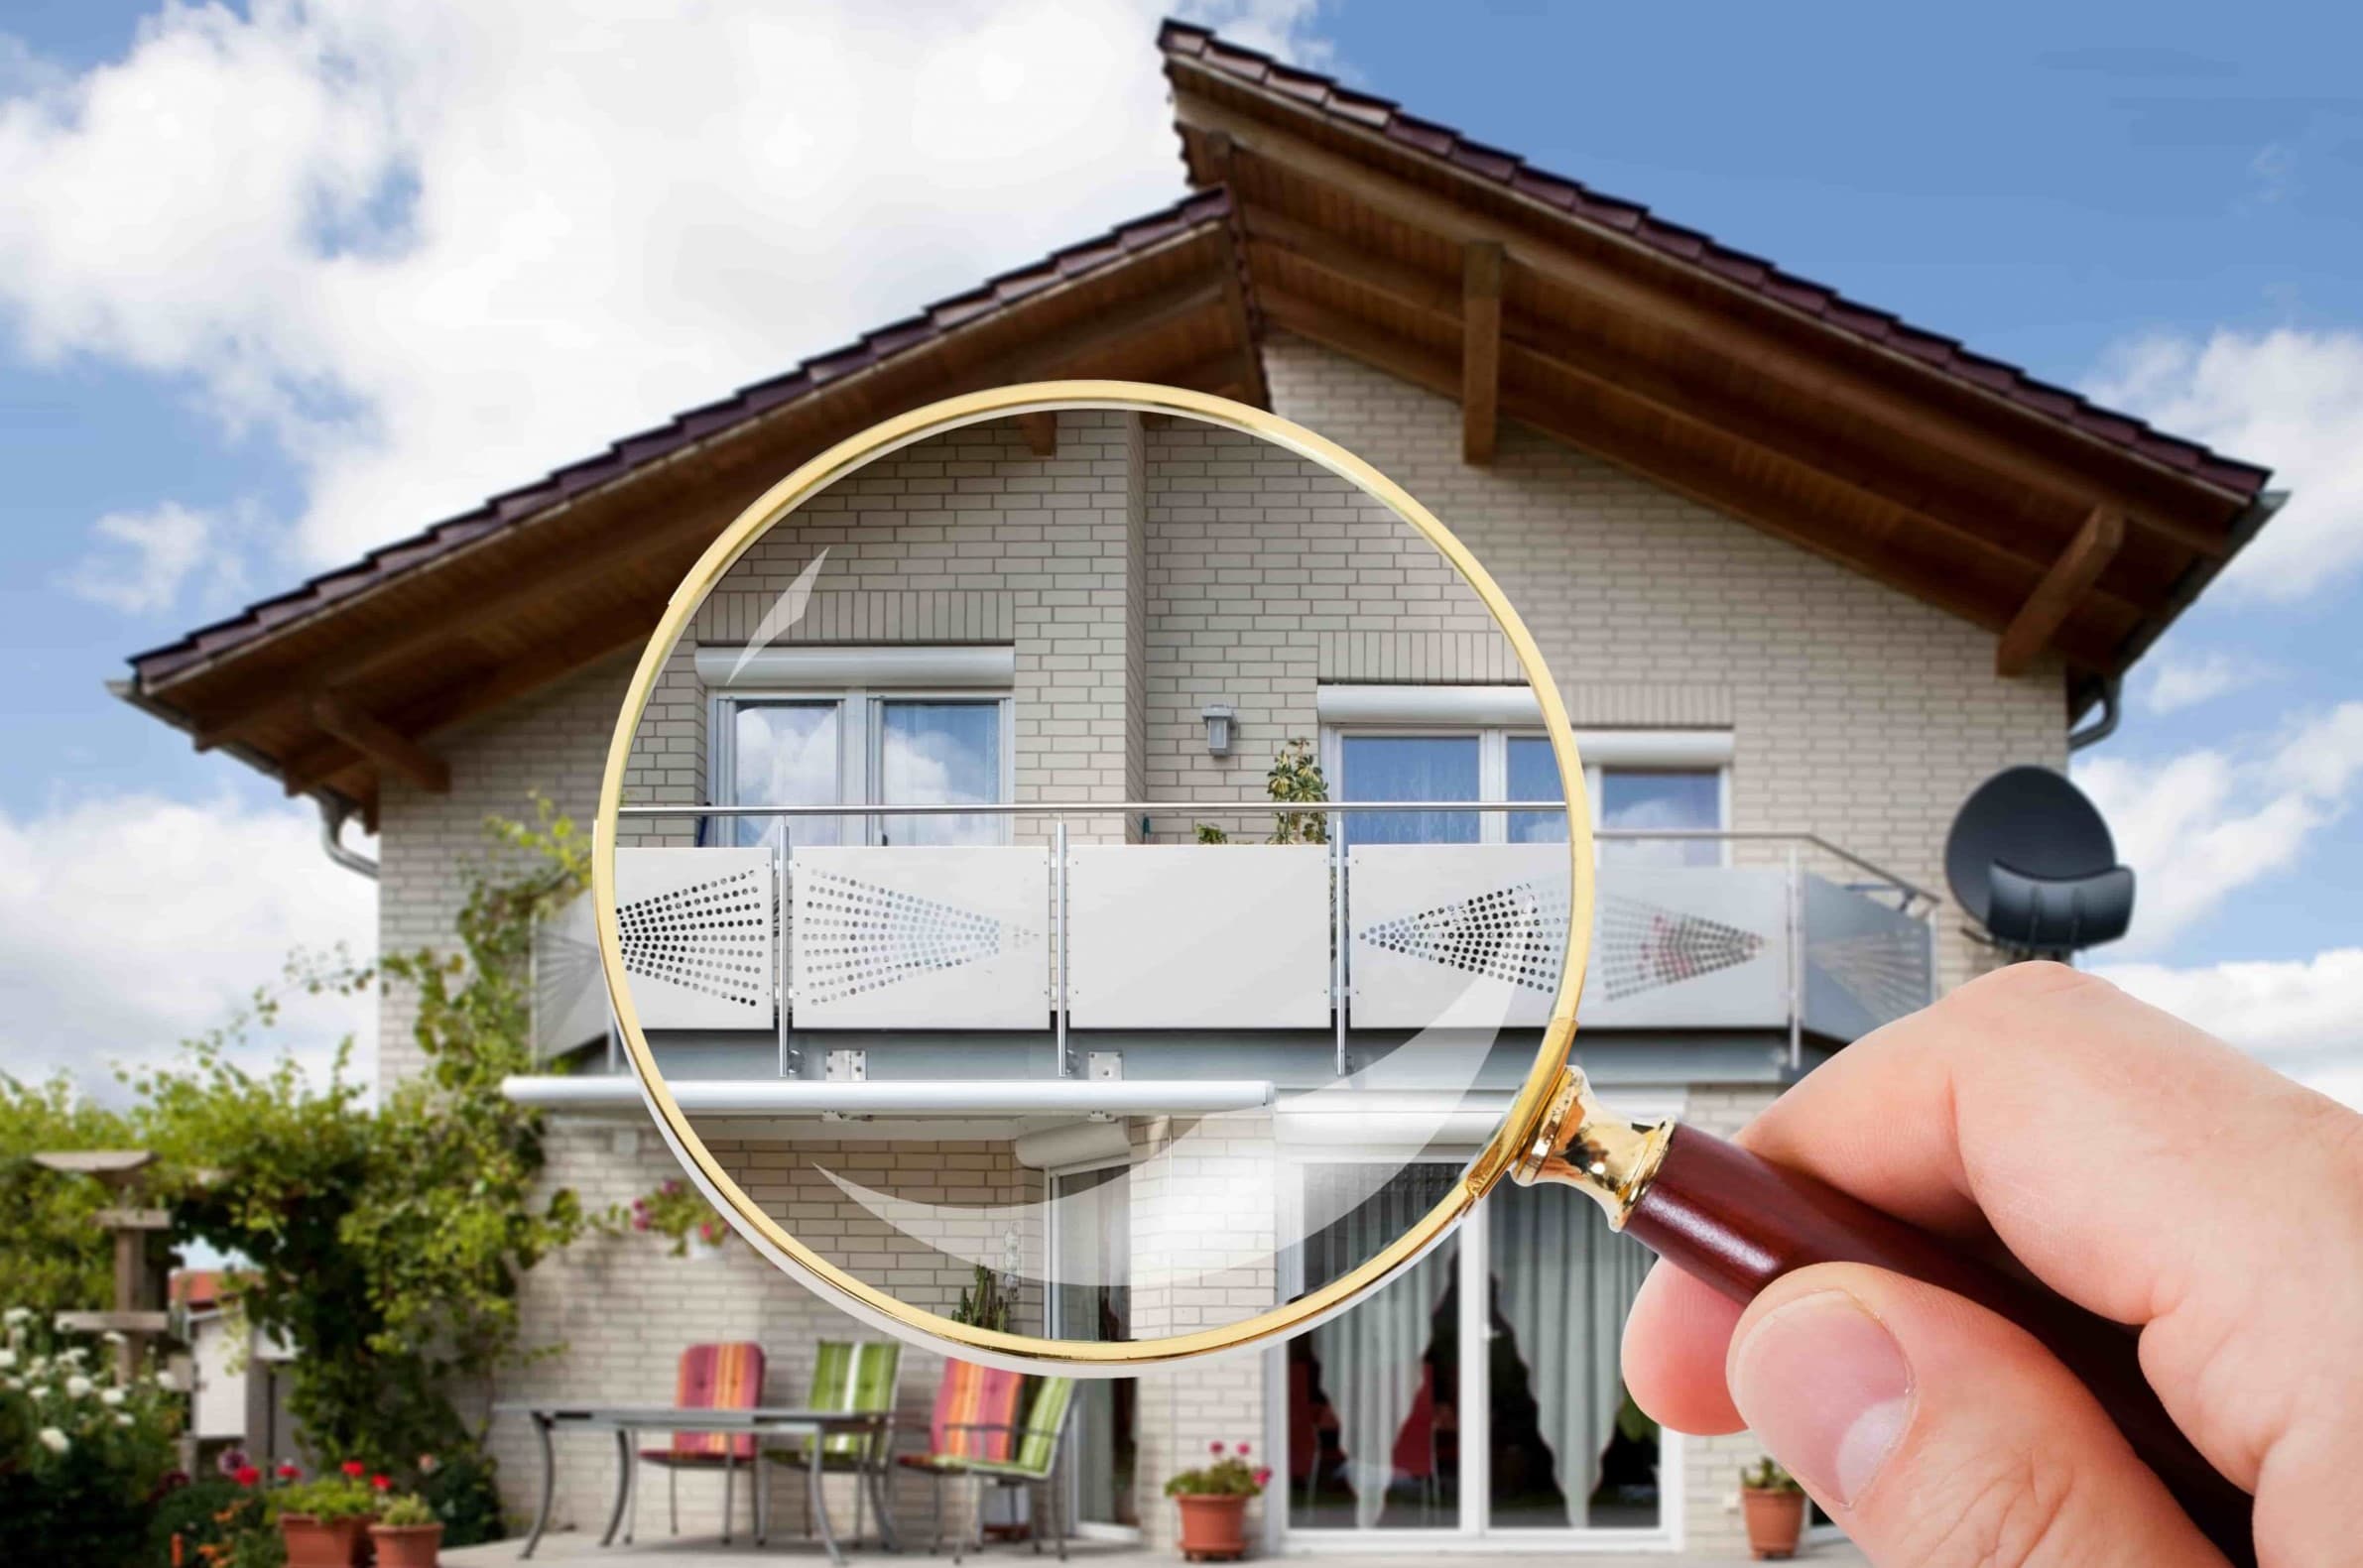 After Home Inspection: What’s Next